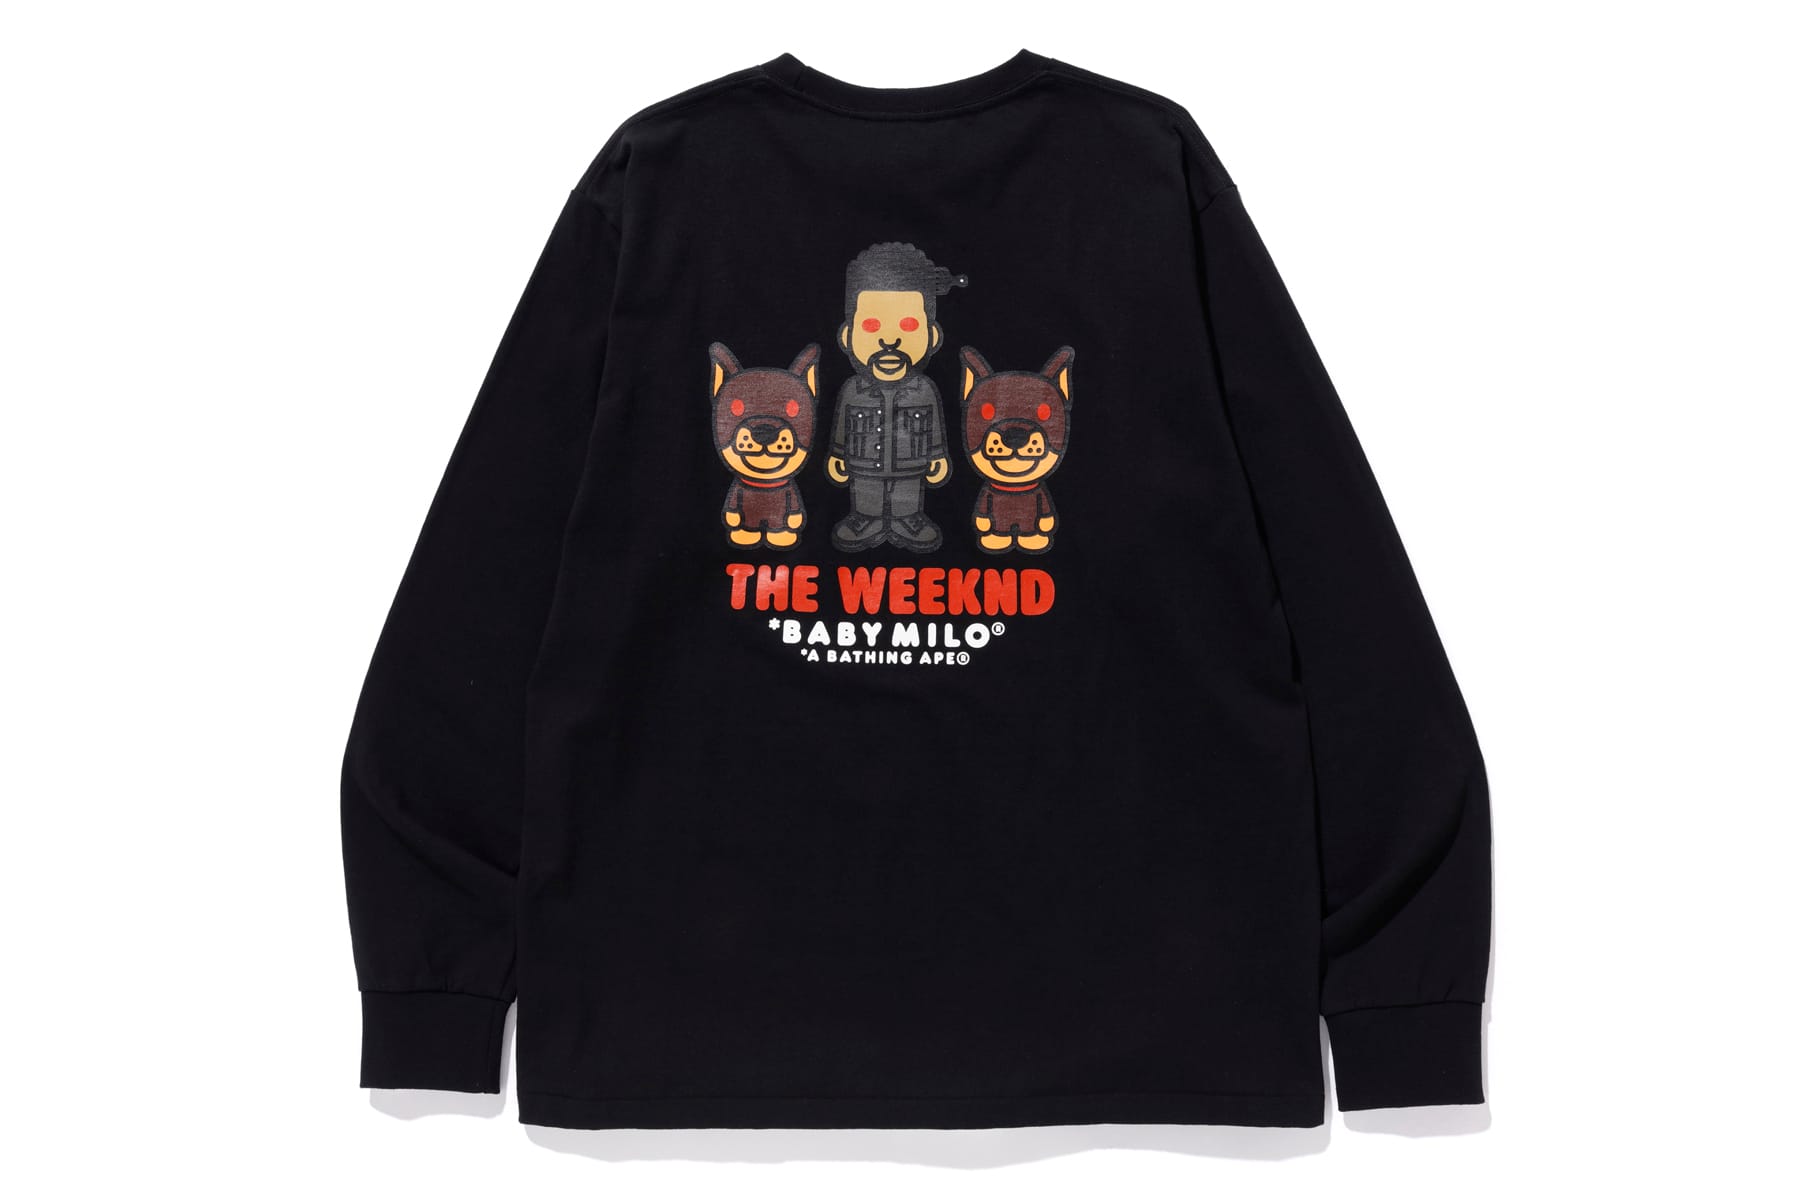 The Weeknd XO x BAPE Second Capsule Collection | HYPEBEAST